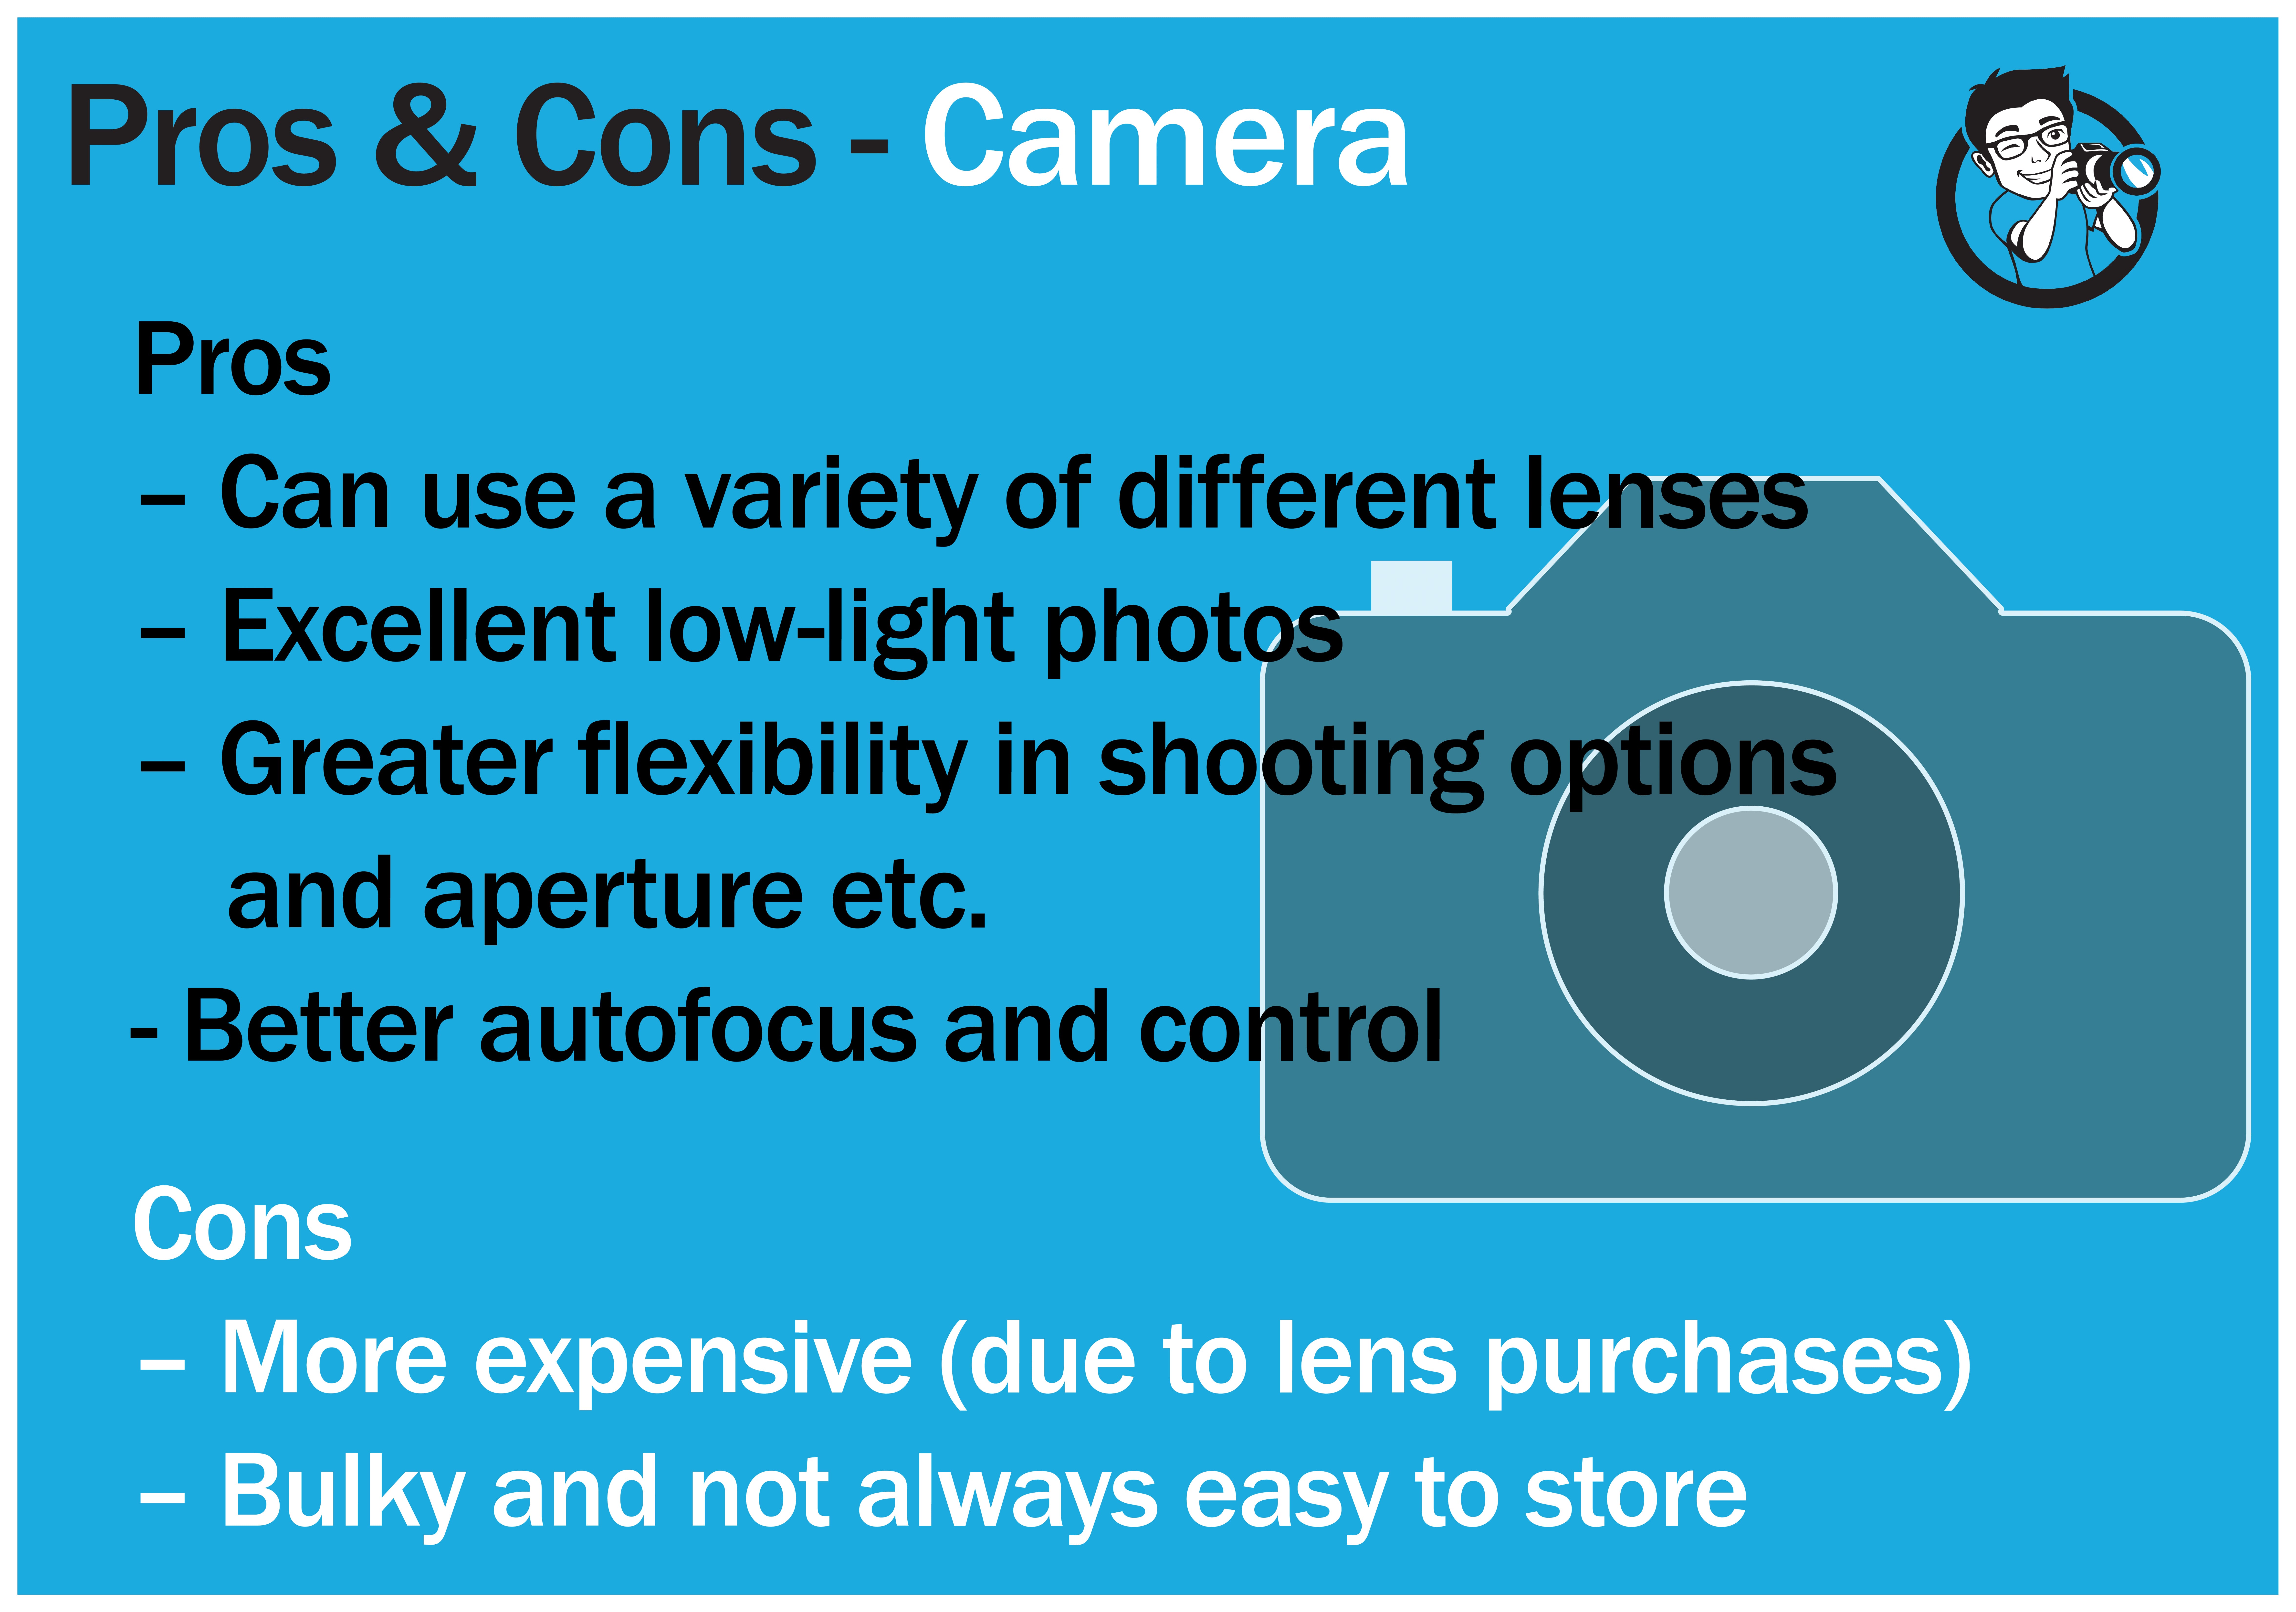 Pros and Cons of a Camera